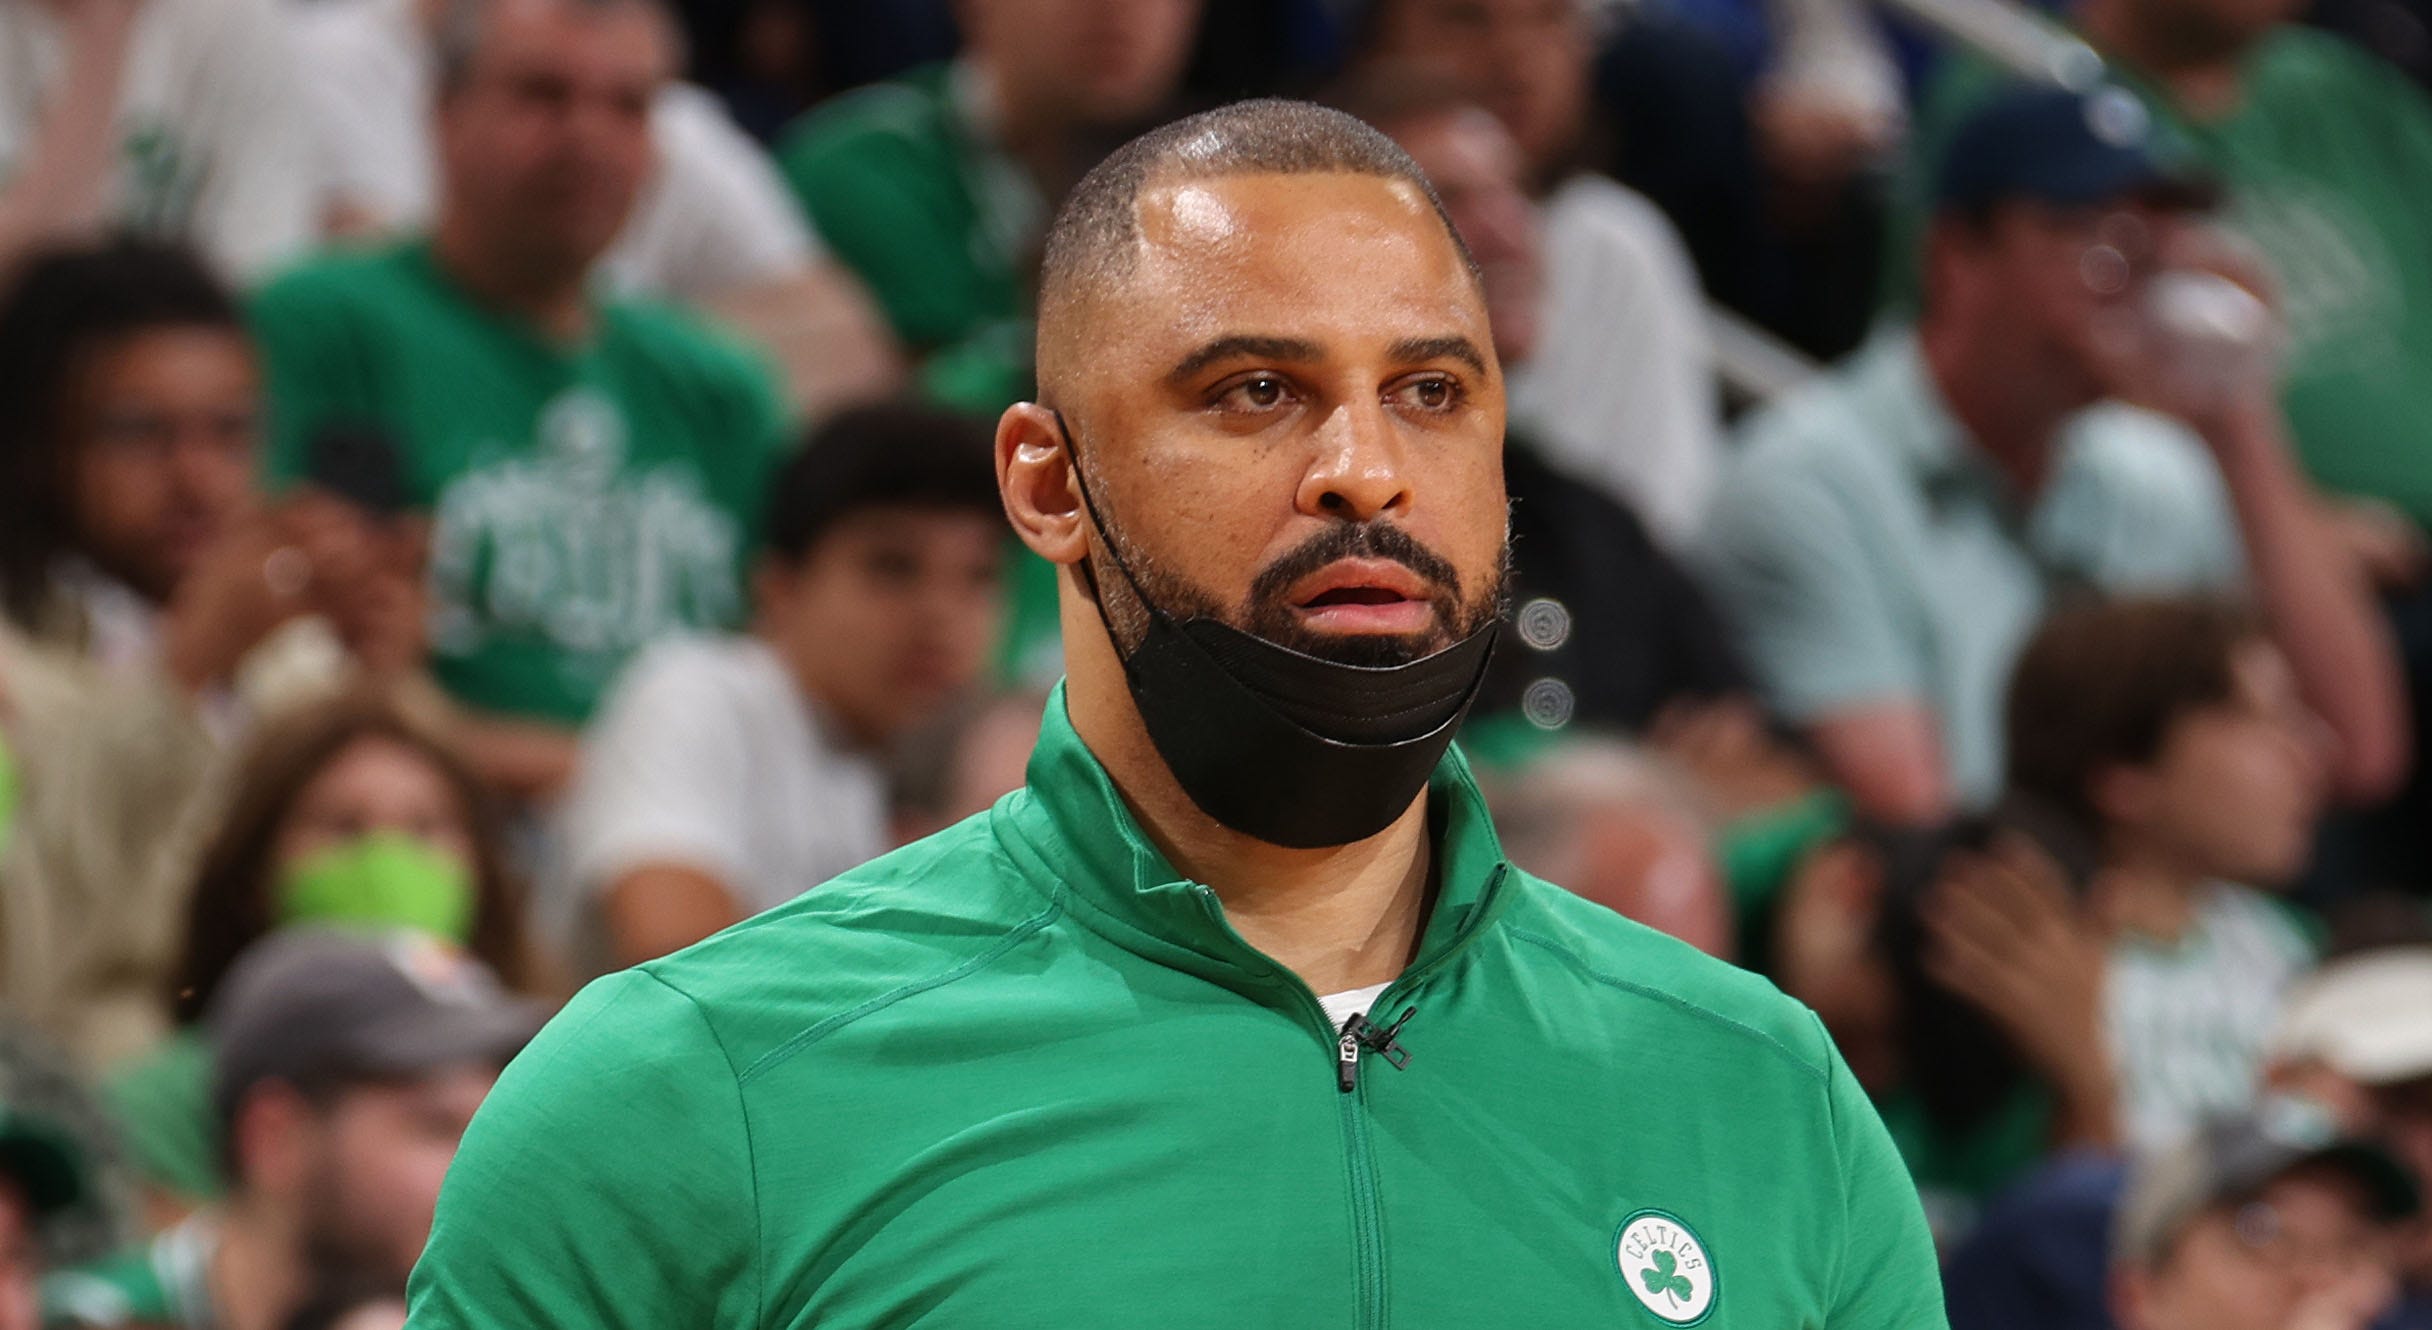 Celtics’ Ime Udoka could face ‘significant suspension’ for violating team guidelines: report – Fox News